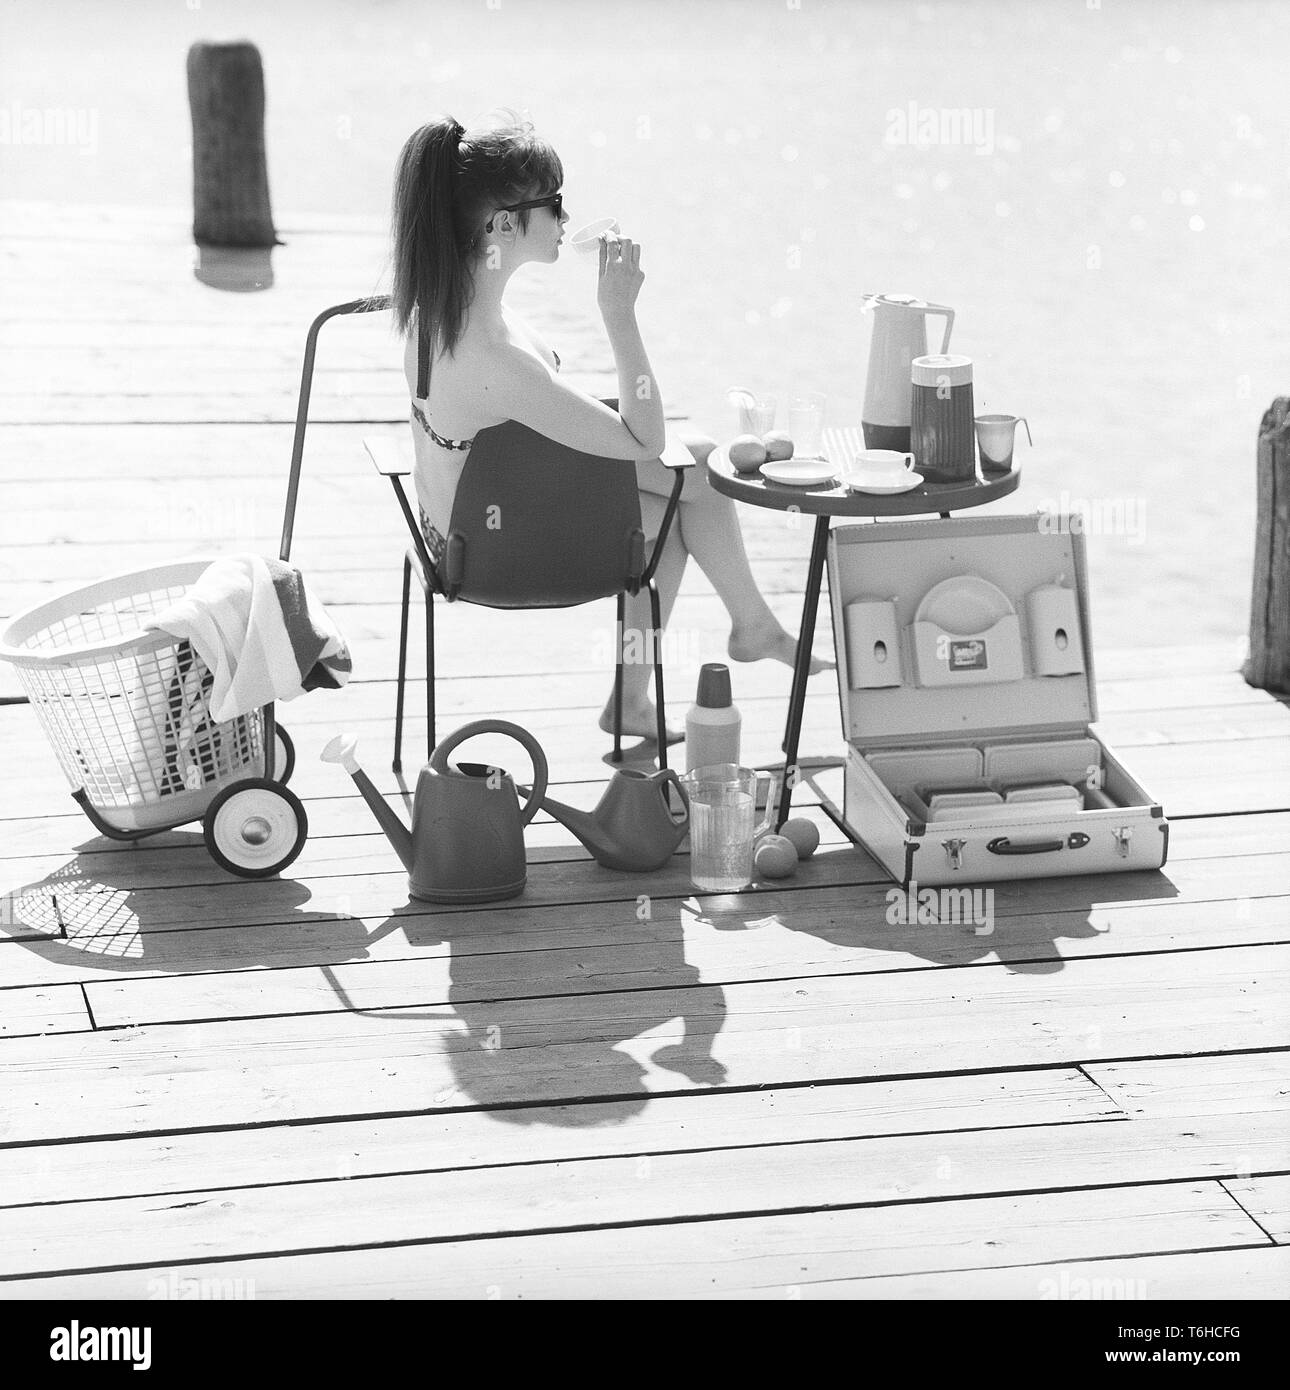 1960s lifestyle. A young woman sitting in the sun wearing a bikini. In the picture there are many of the timely objects made of plastic that were popular at the time. Especially when being on a summer vacation or camping. A set of cups and saucers on the table. A practical case to transport them in. Sweden 1960s Photo Kristoffersson ref DB85-2 Stock Photo